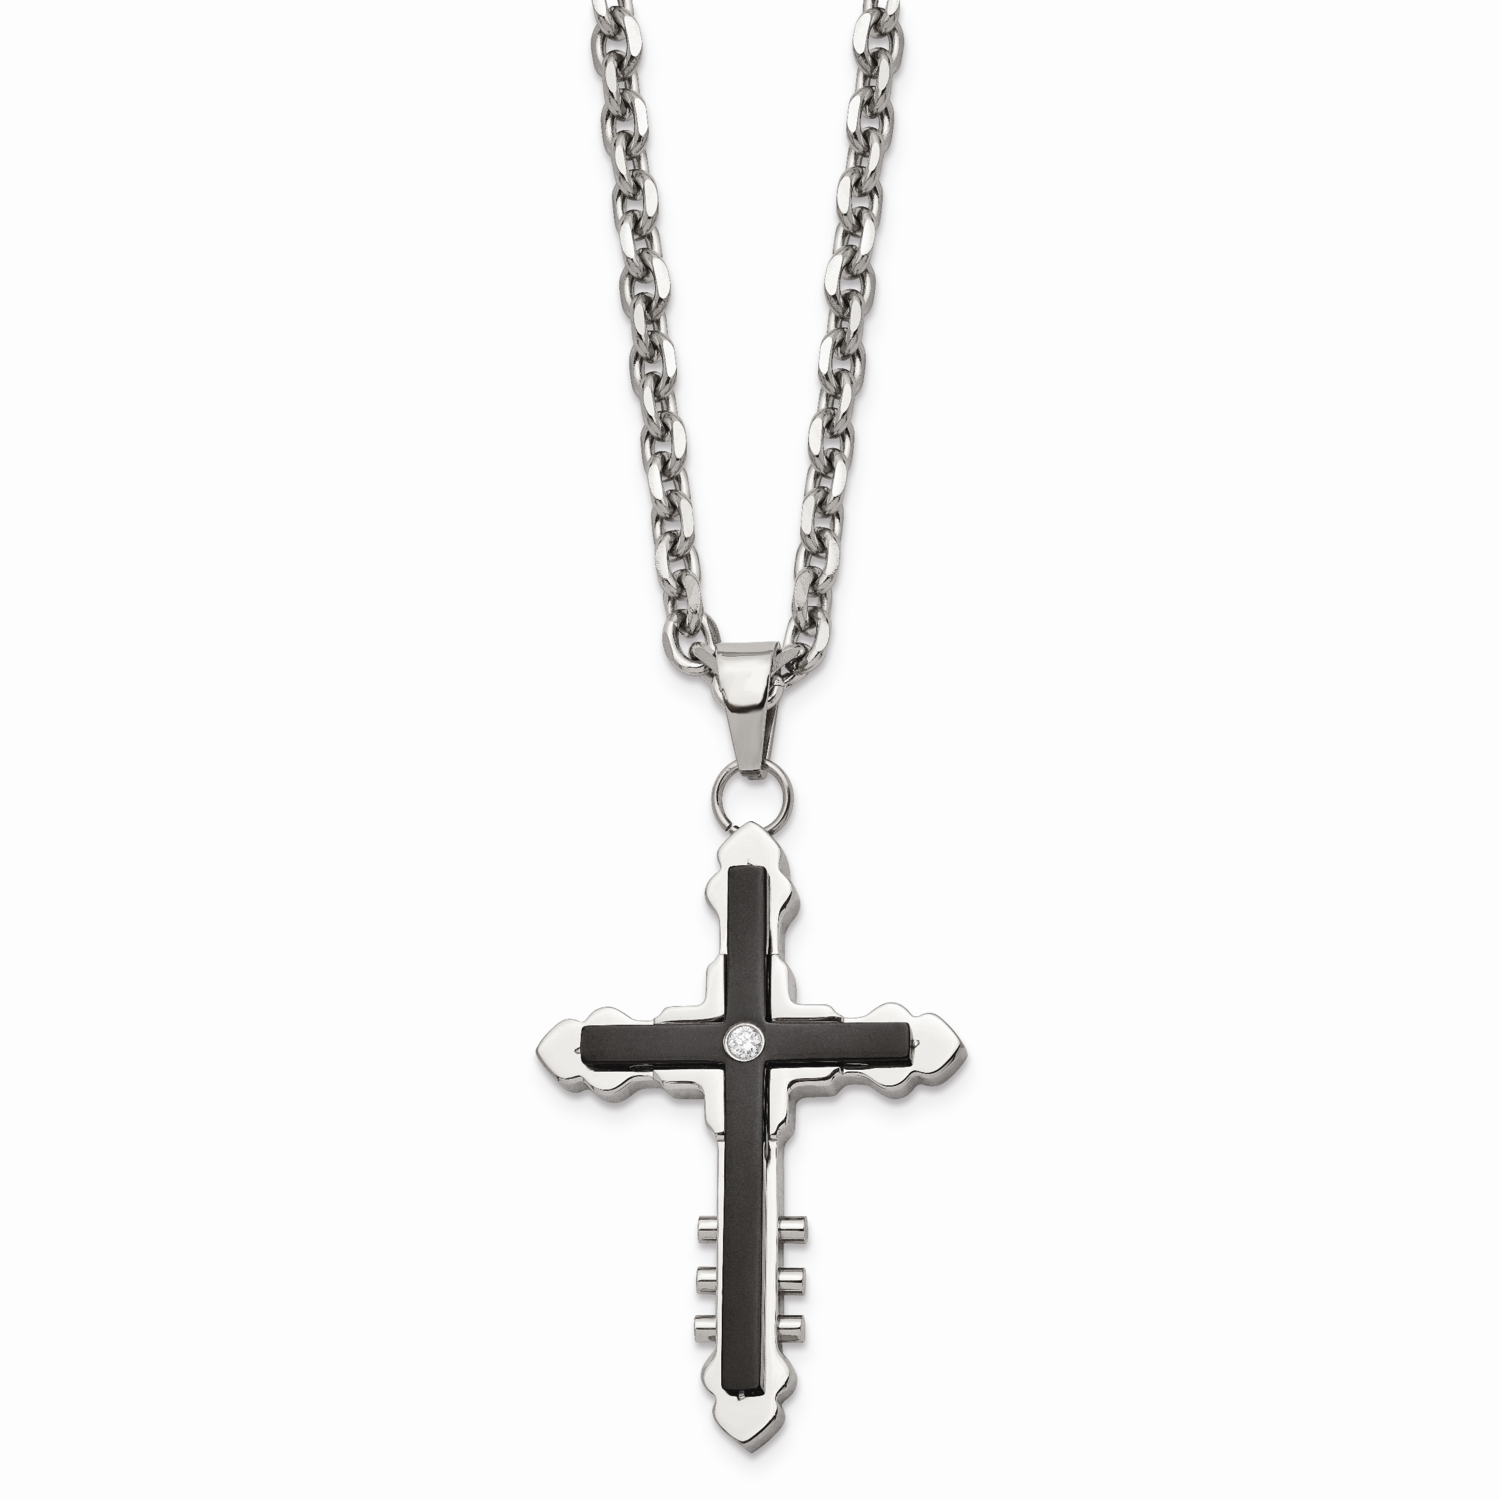 IP Black-plated & CZ Stone Stone Cross Pendant Necklace Stainless Steel SRN859-22